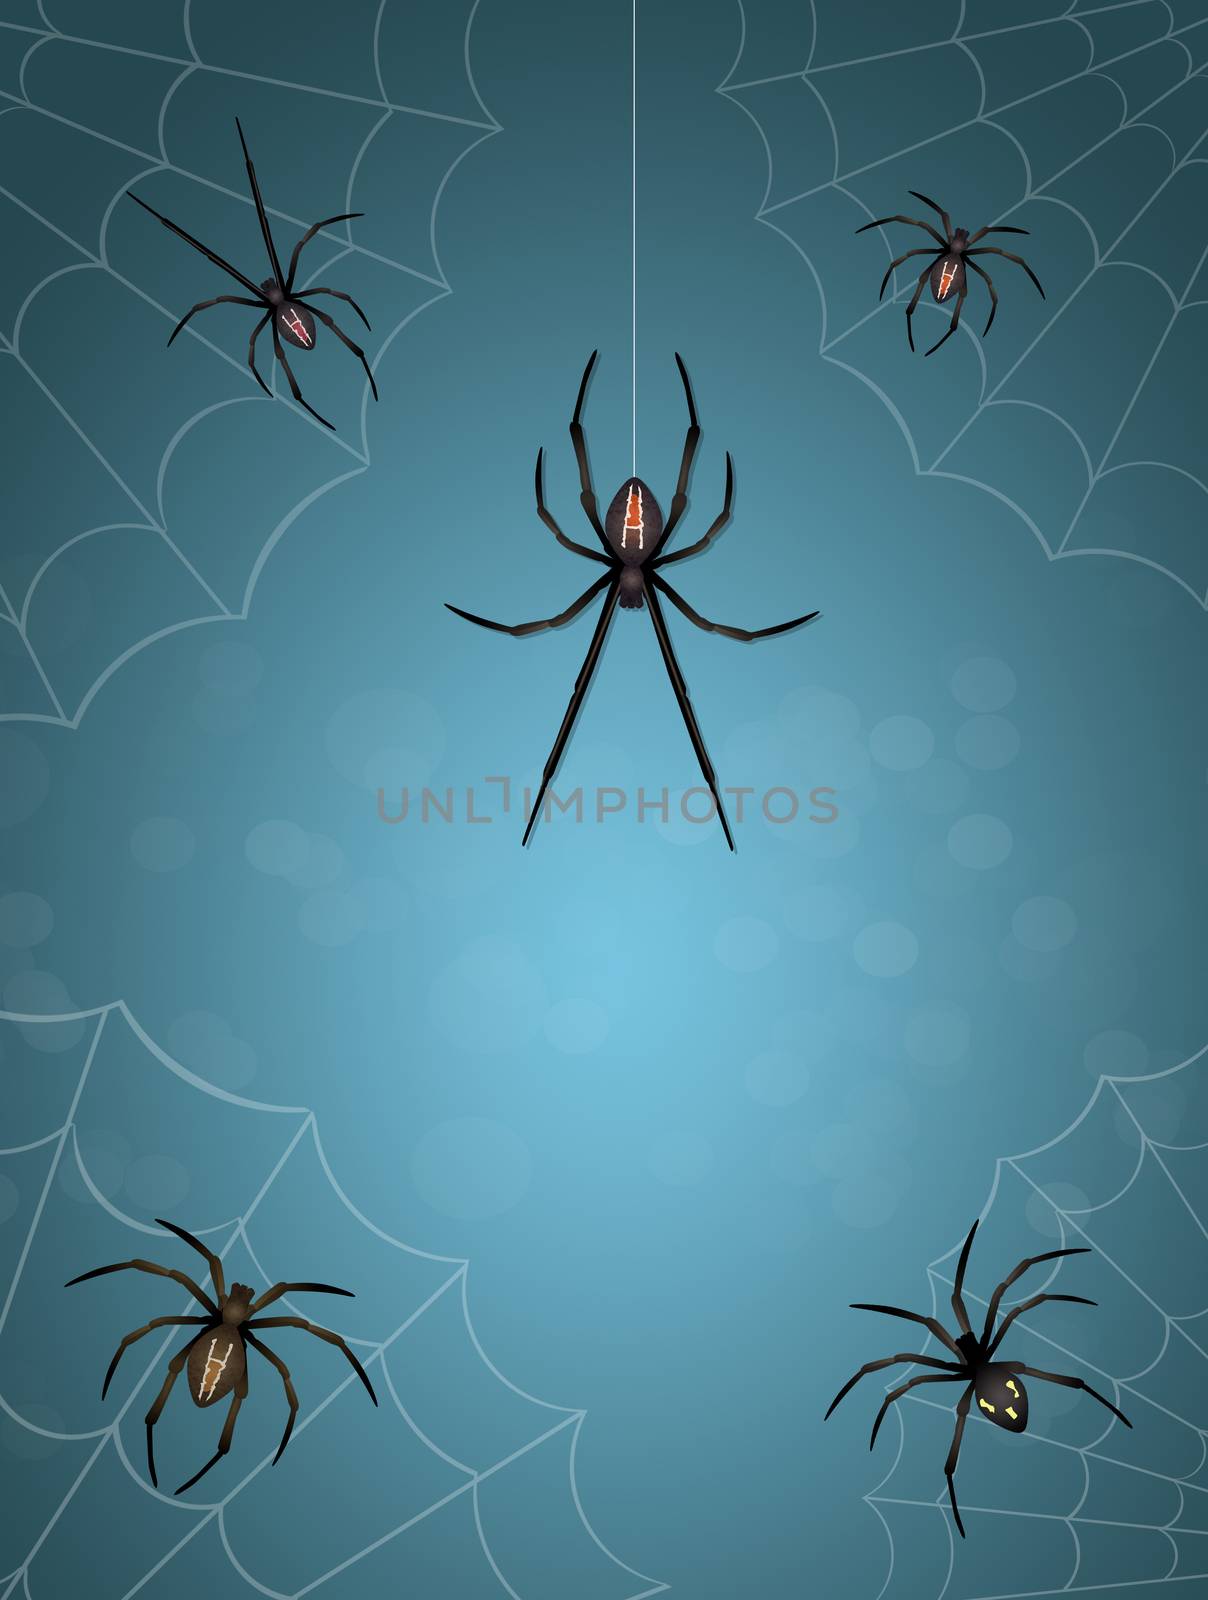 illustration of spiders by adrenalina